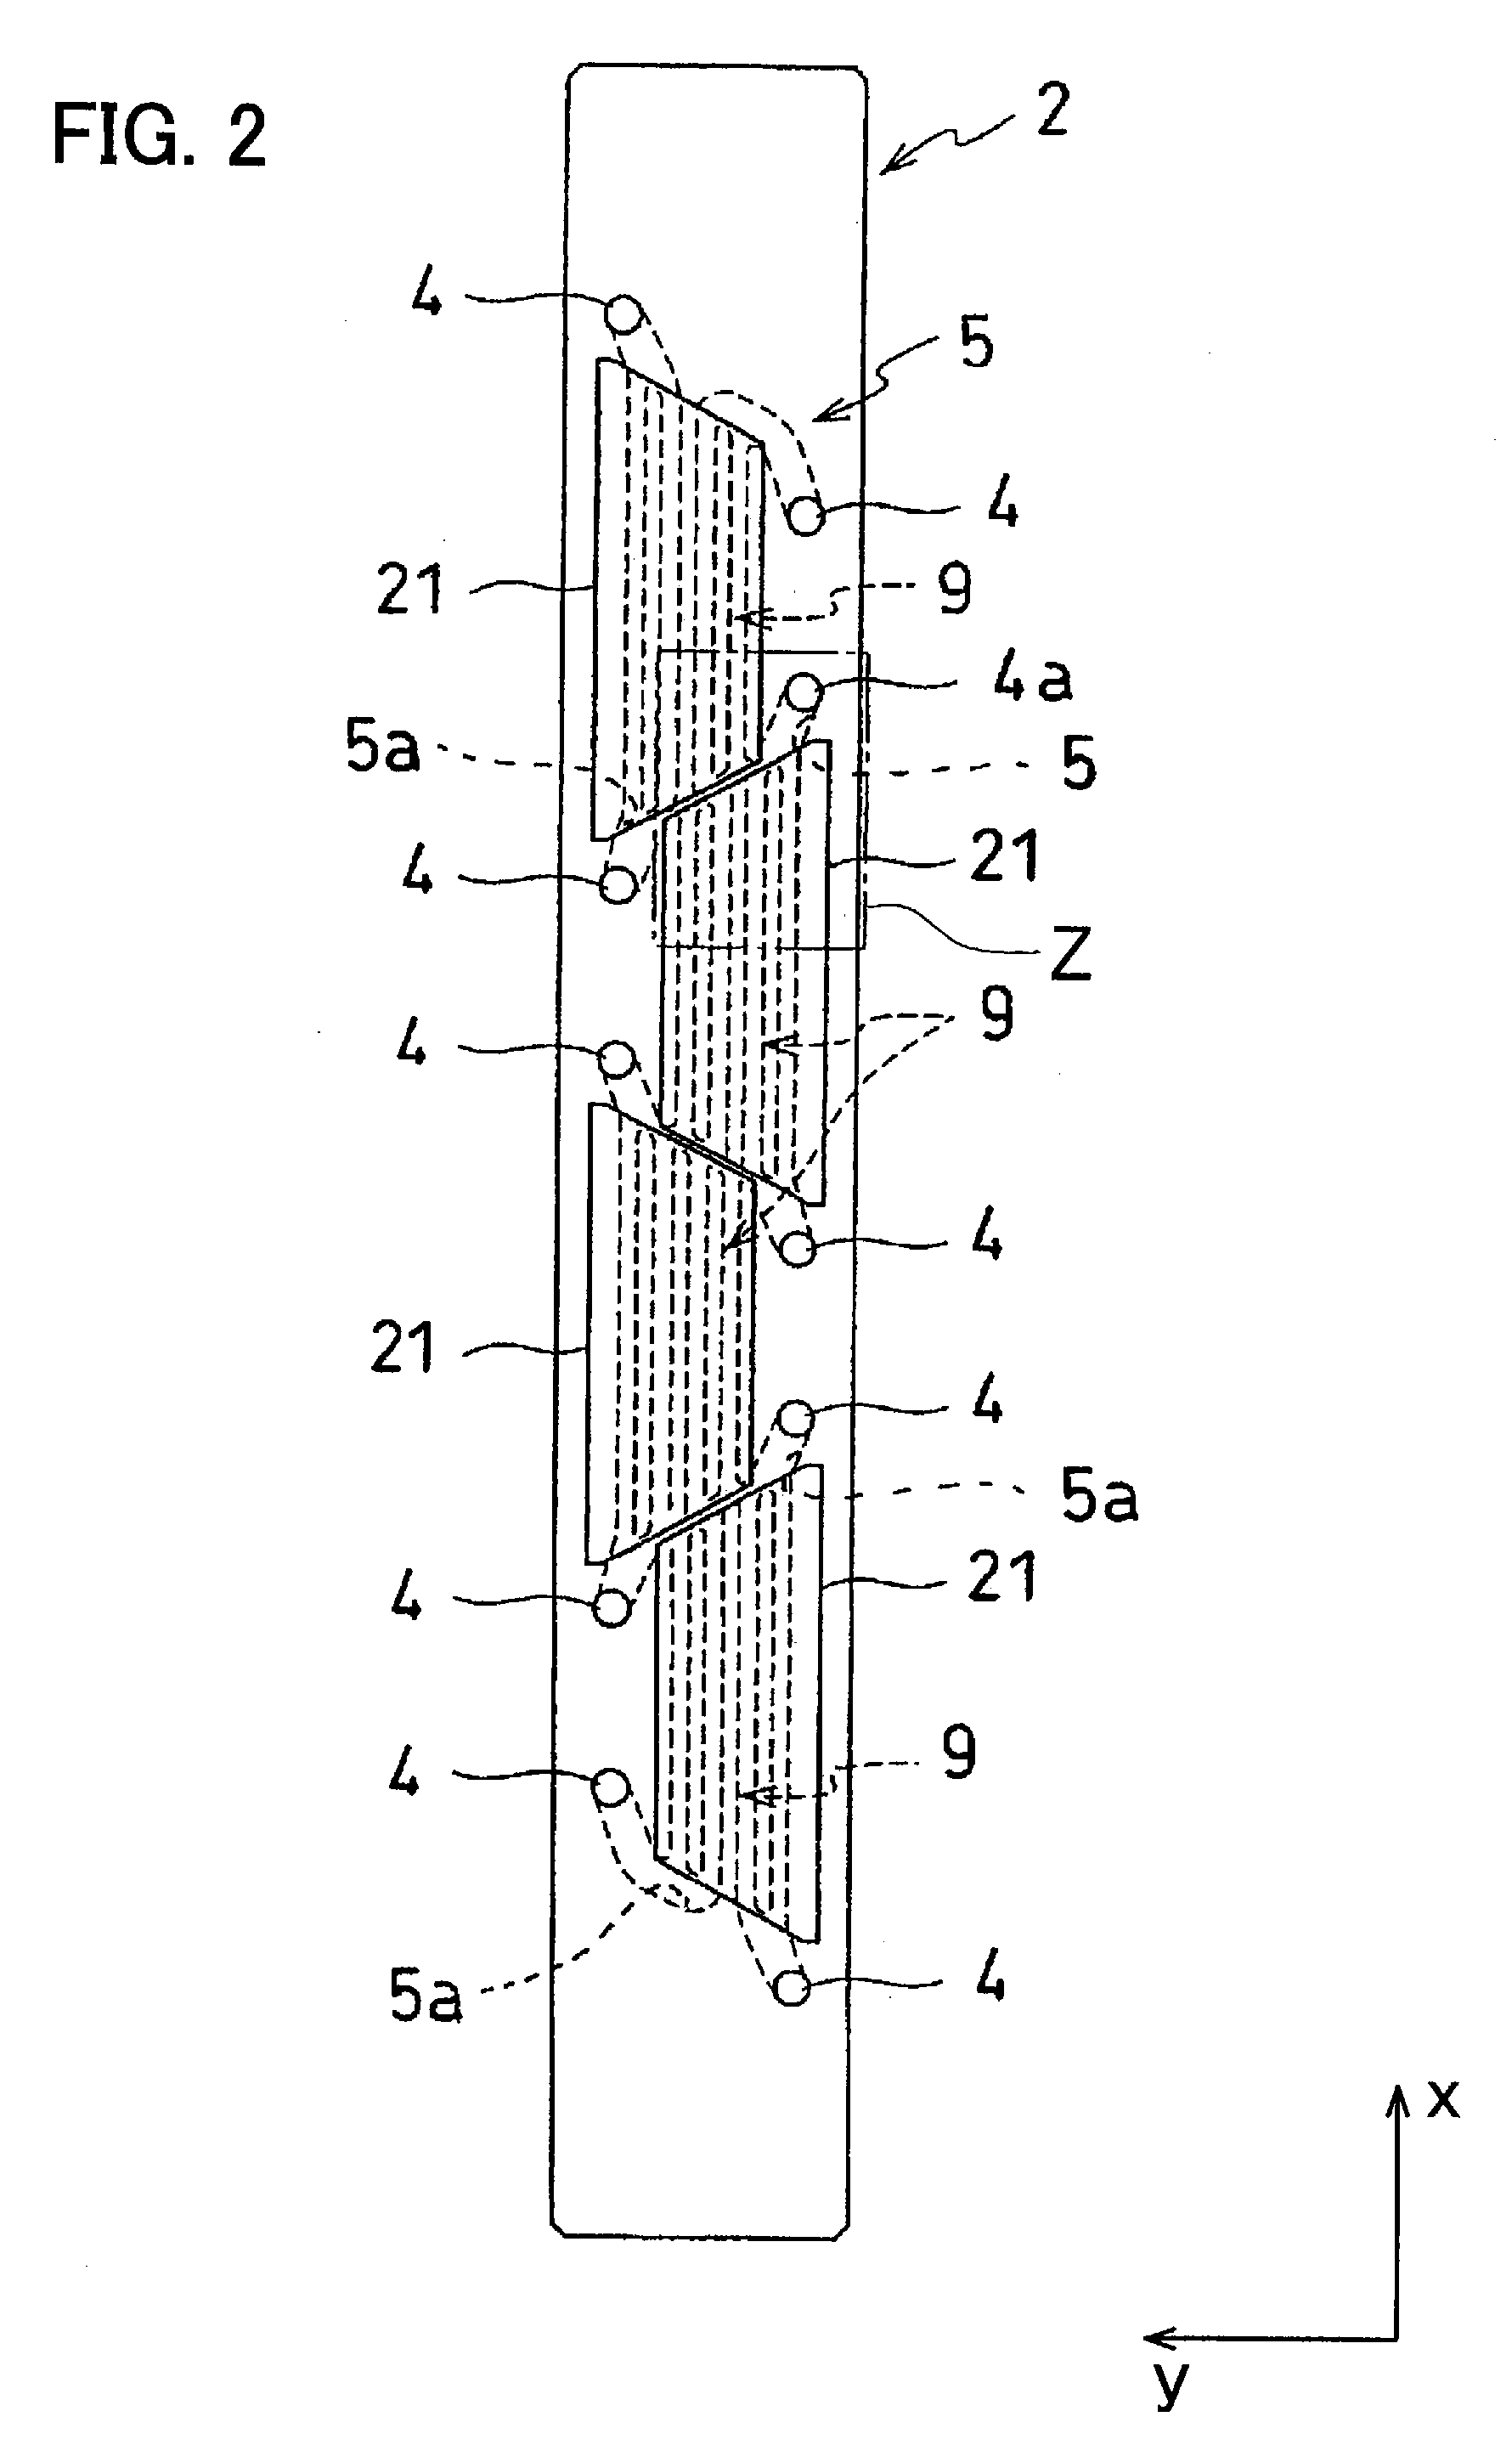 Method of Testing a Droplet Discharge Device